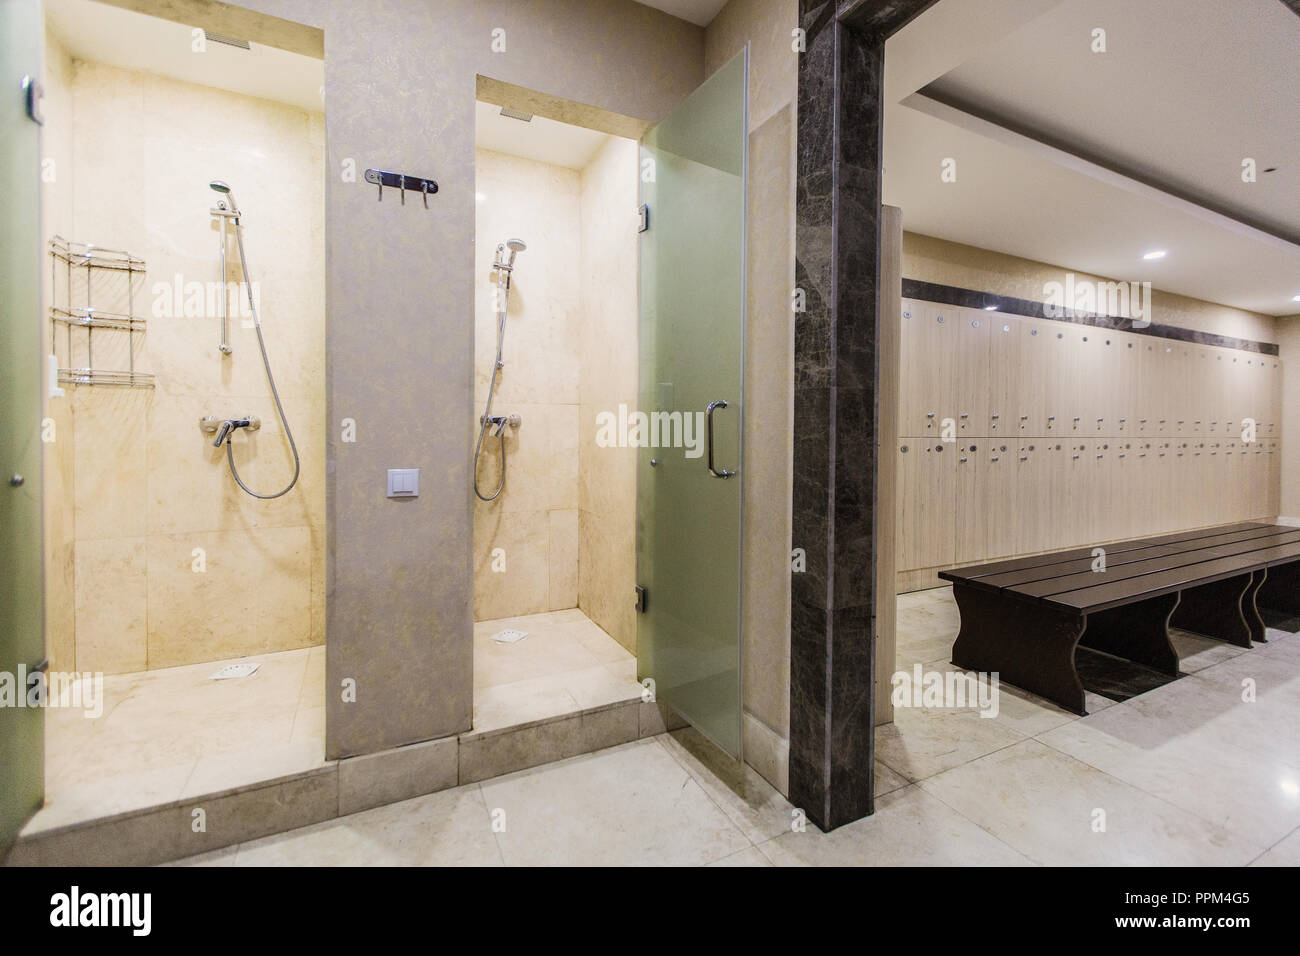 Cloakroom in the hotel or gym, wooden wardrobes, bench and shower rooms Stock Photo